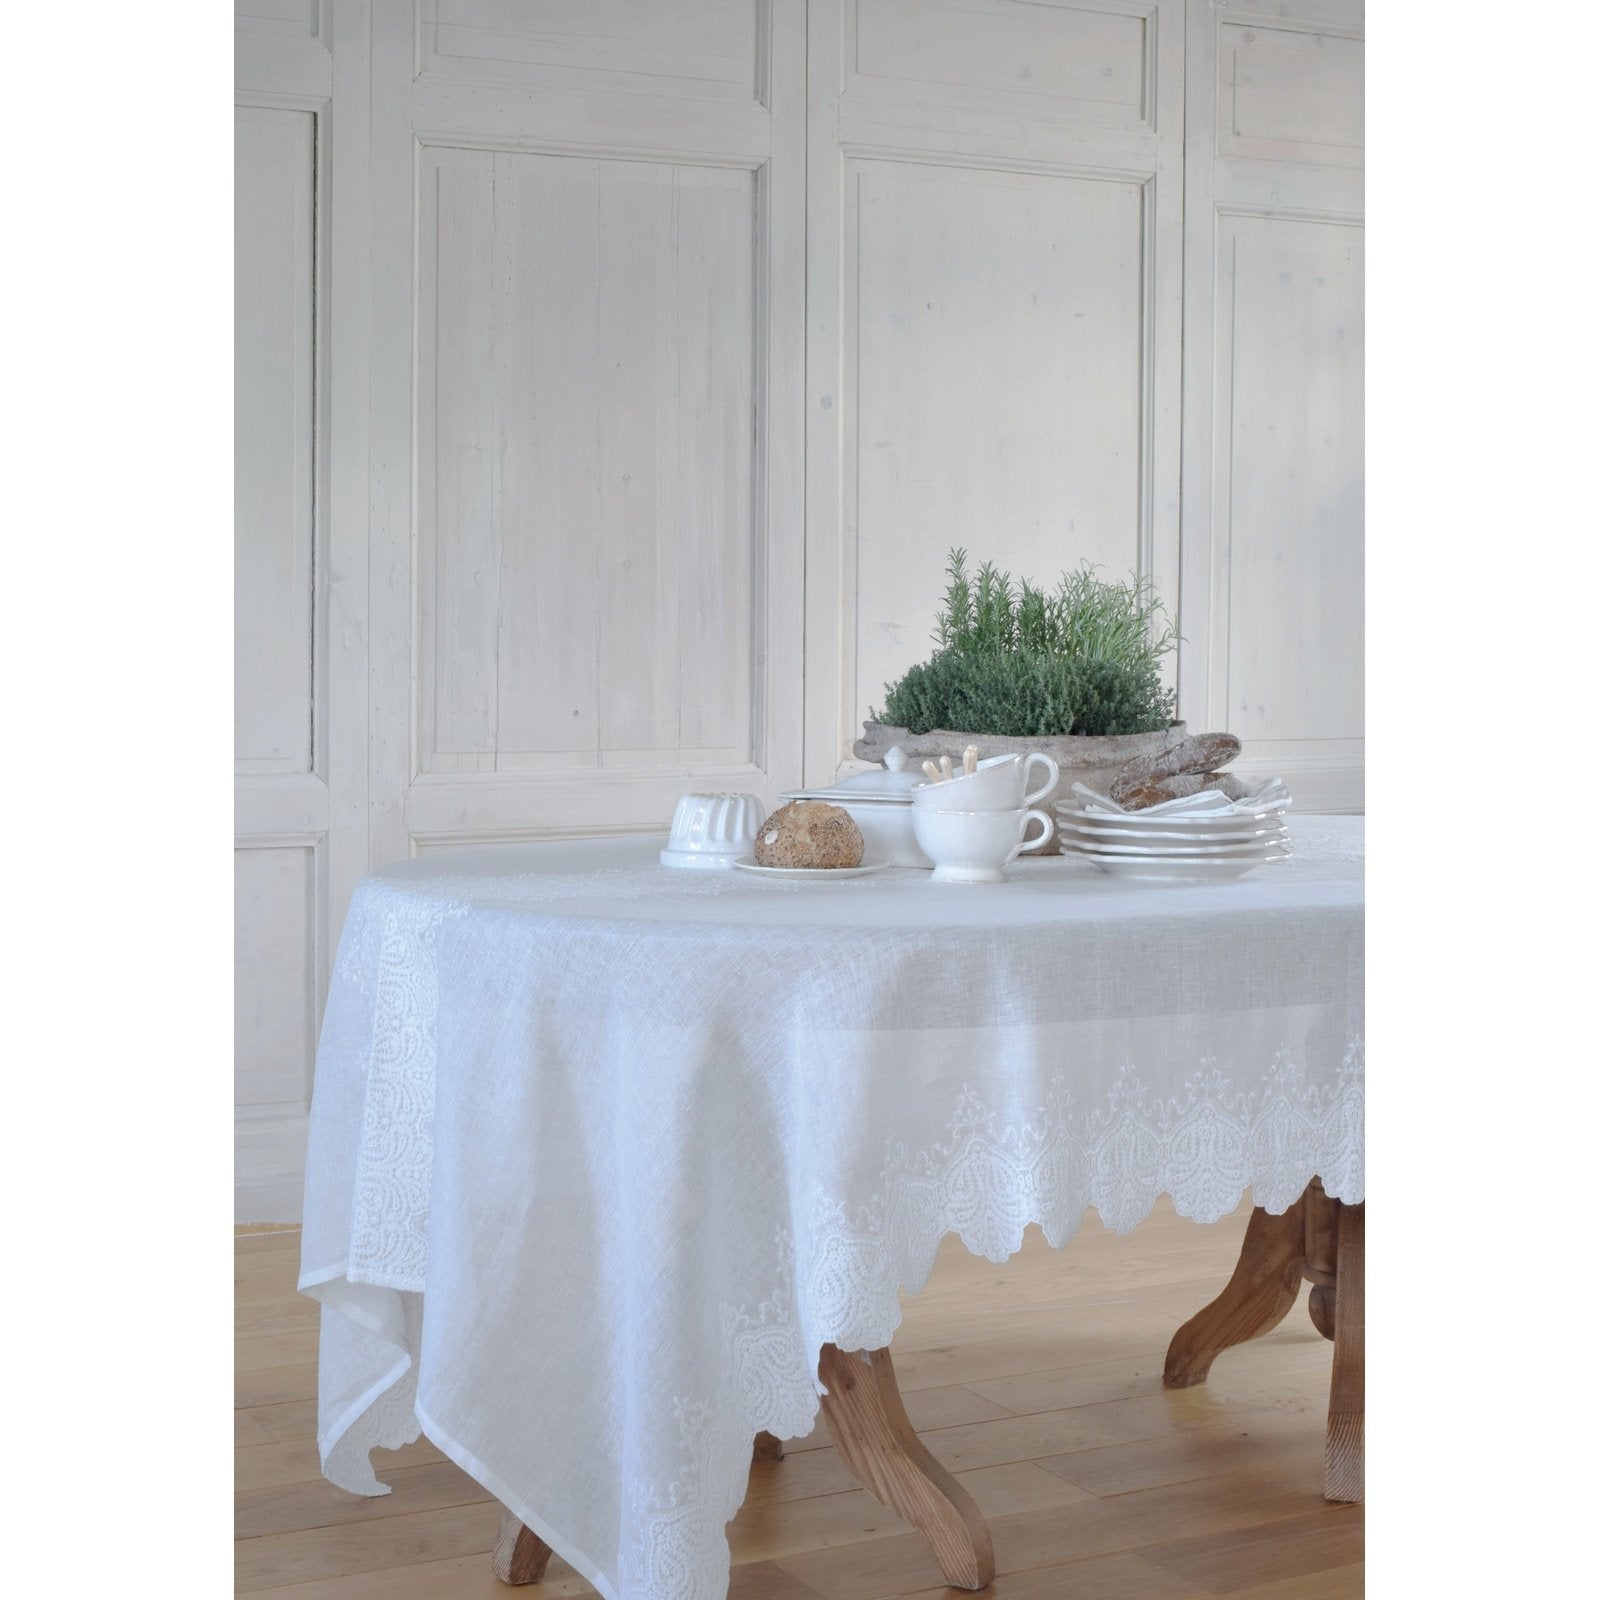 Julia tablecloth is made of 100% linen with a large embroidery in the middle and 2 large embroidered scalloped borders along the length. The simplicity of the linen and the luxury of the embroidery give this tablecloth its well-deserved stunning looks!